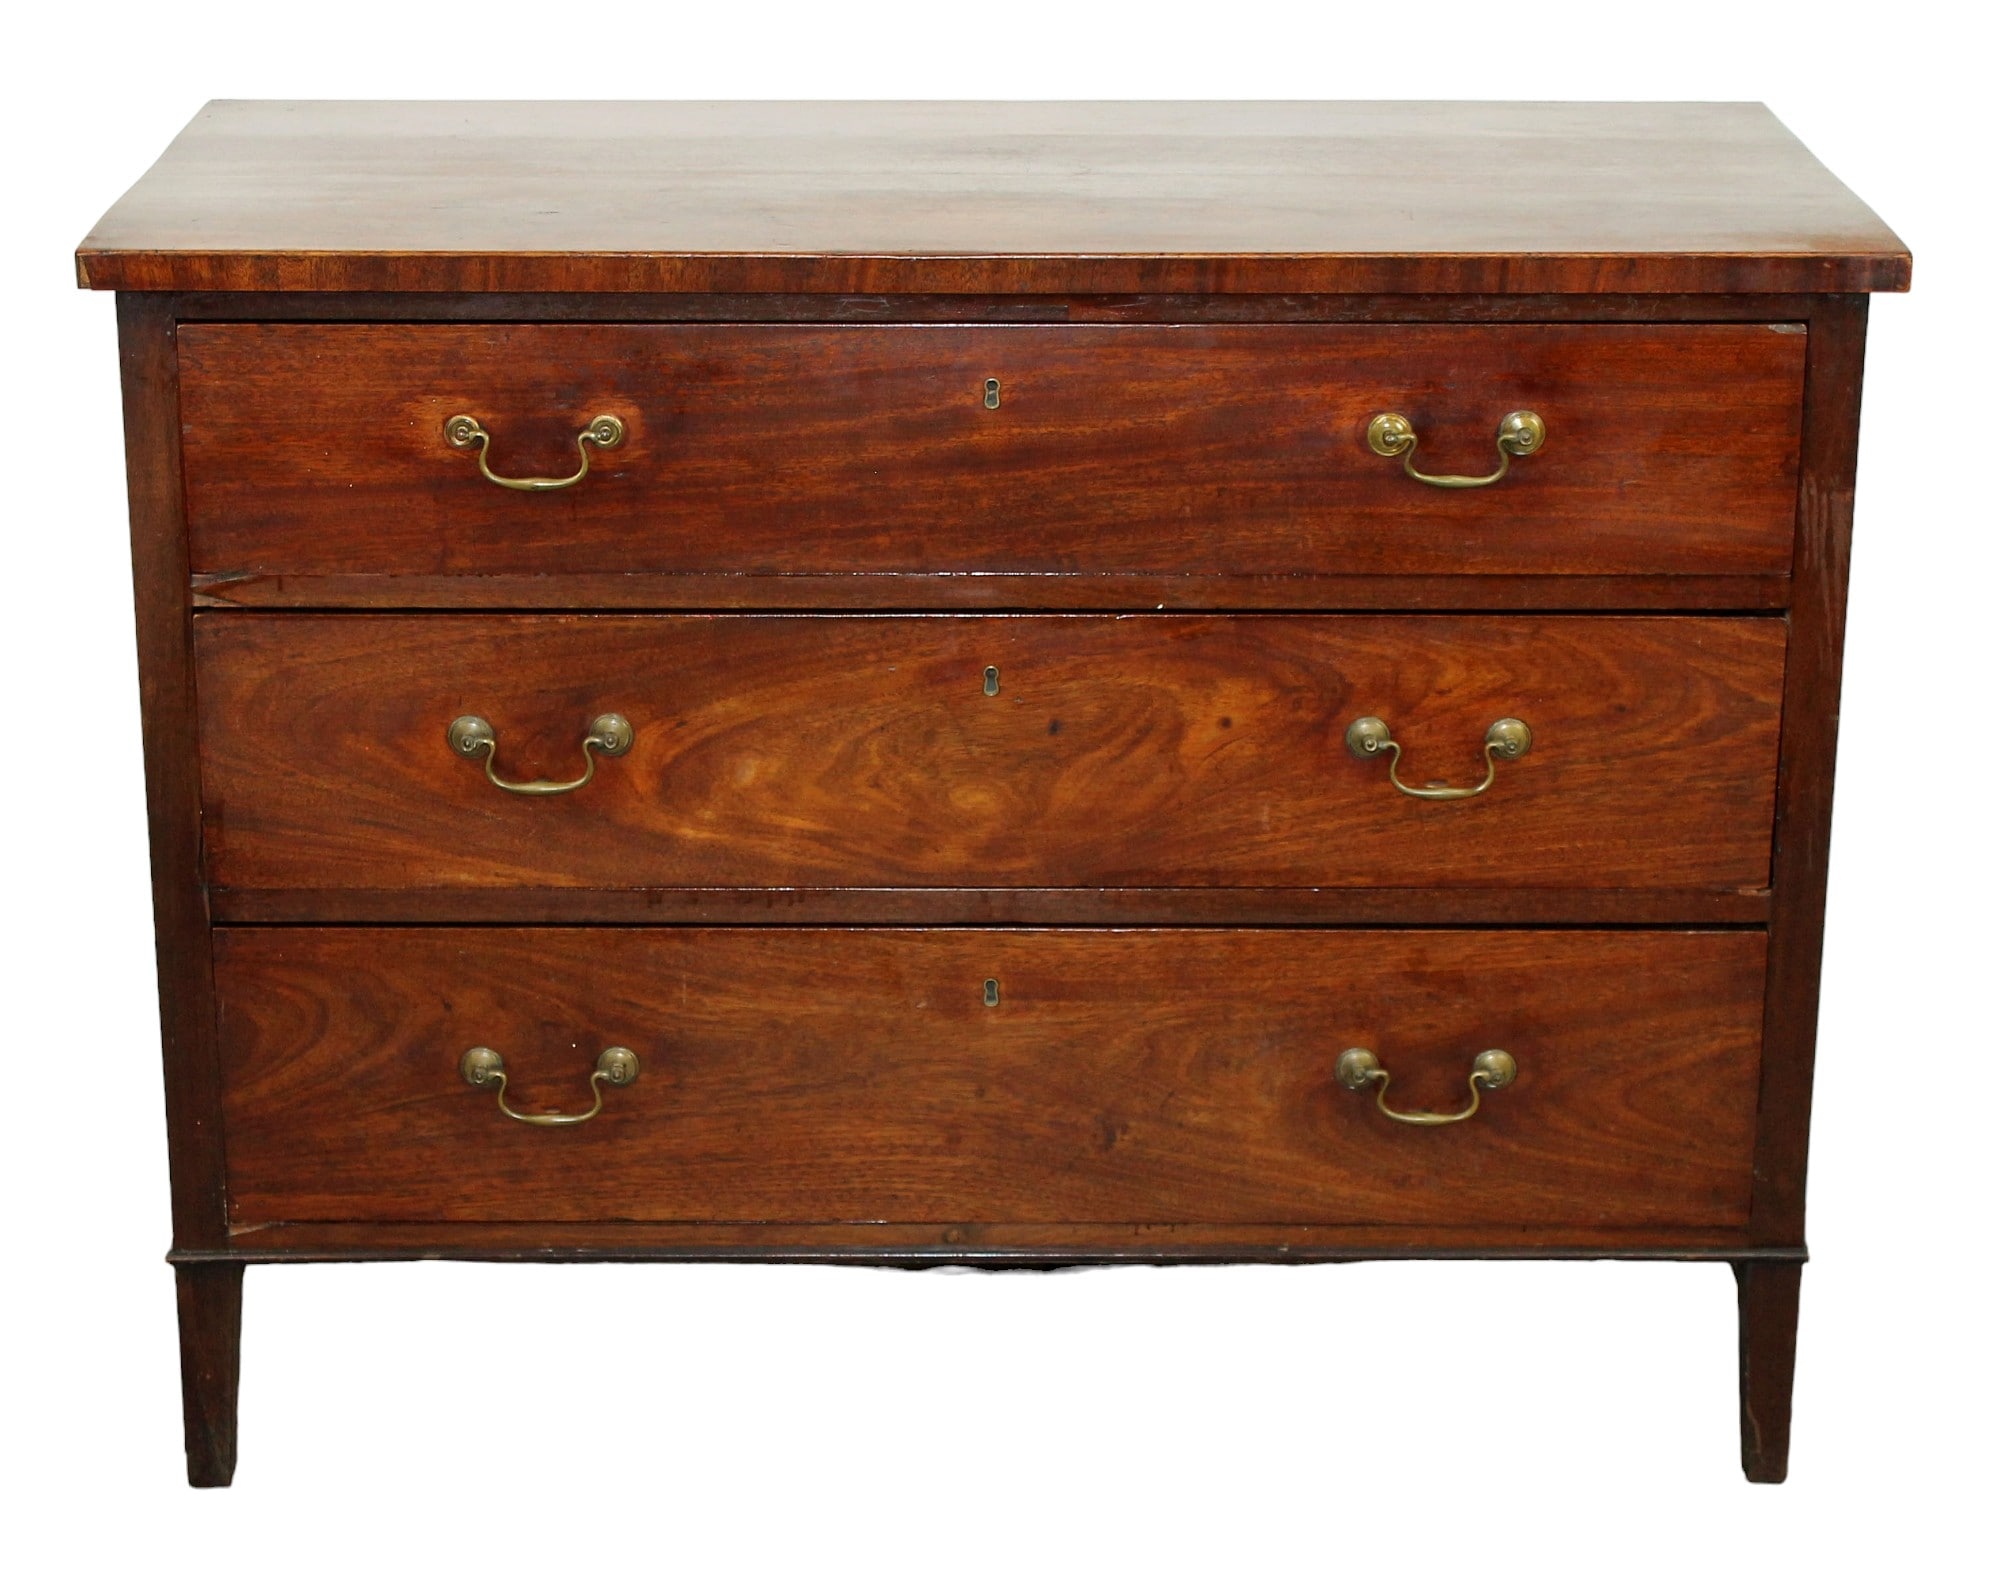 French Louis XVI style 3 drawer commode